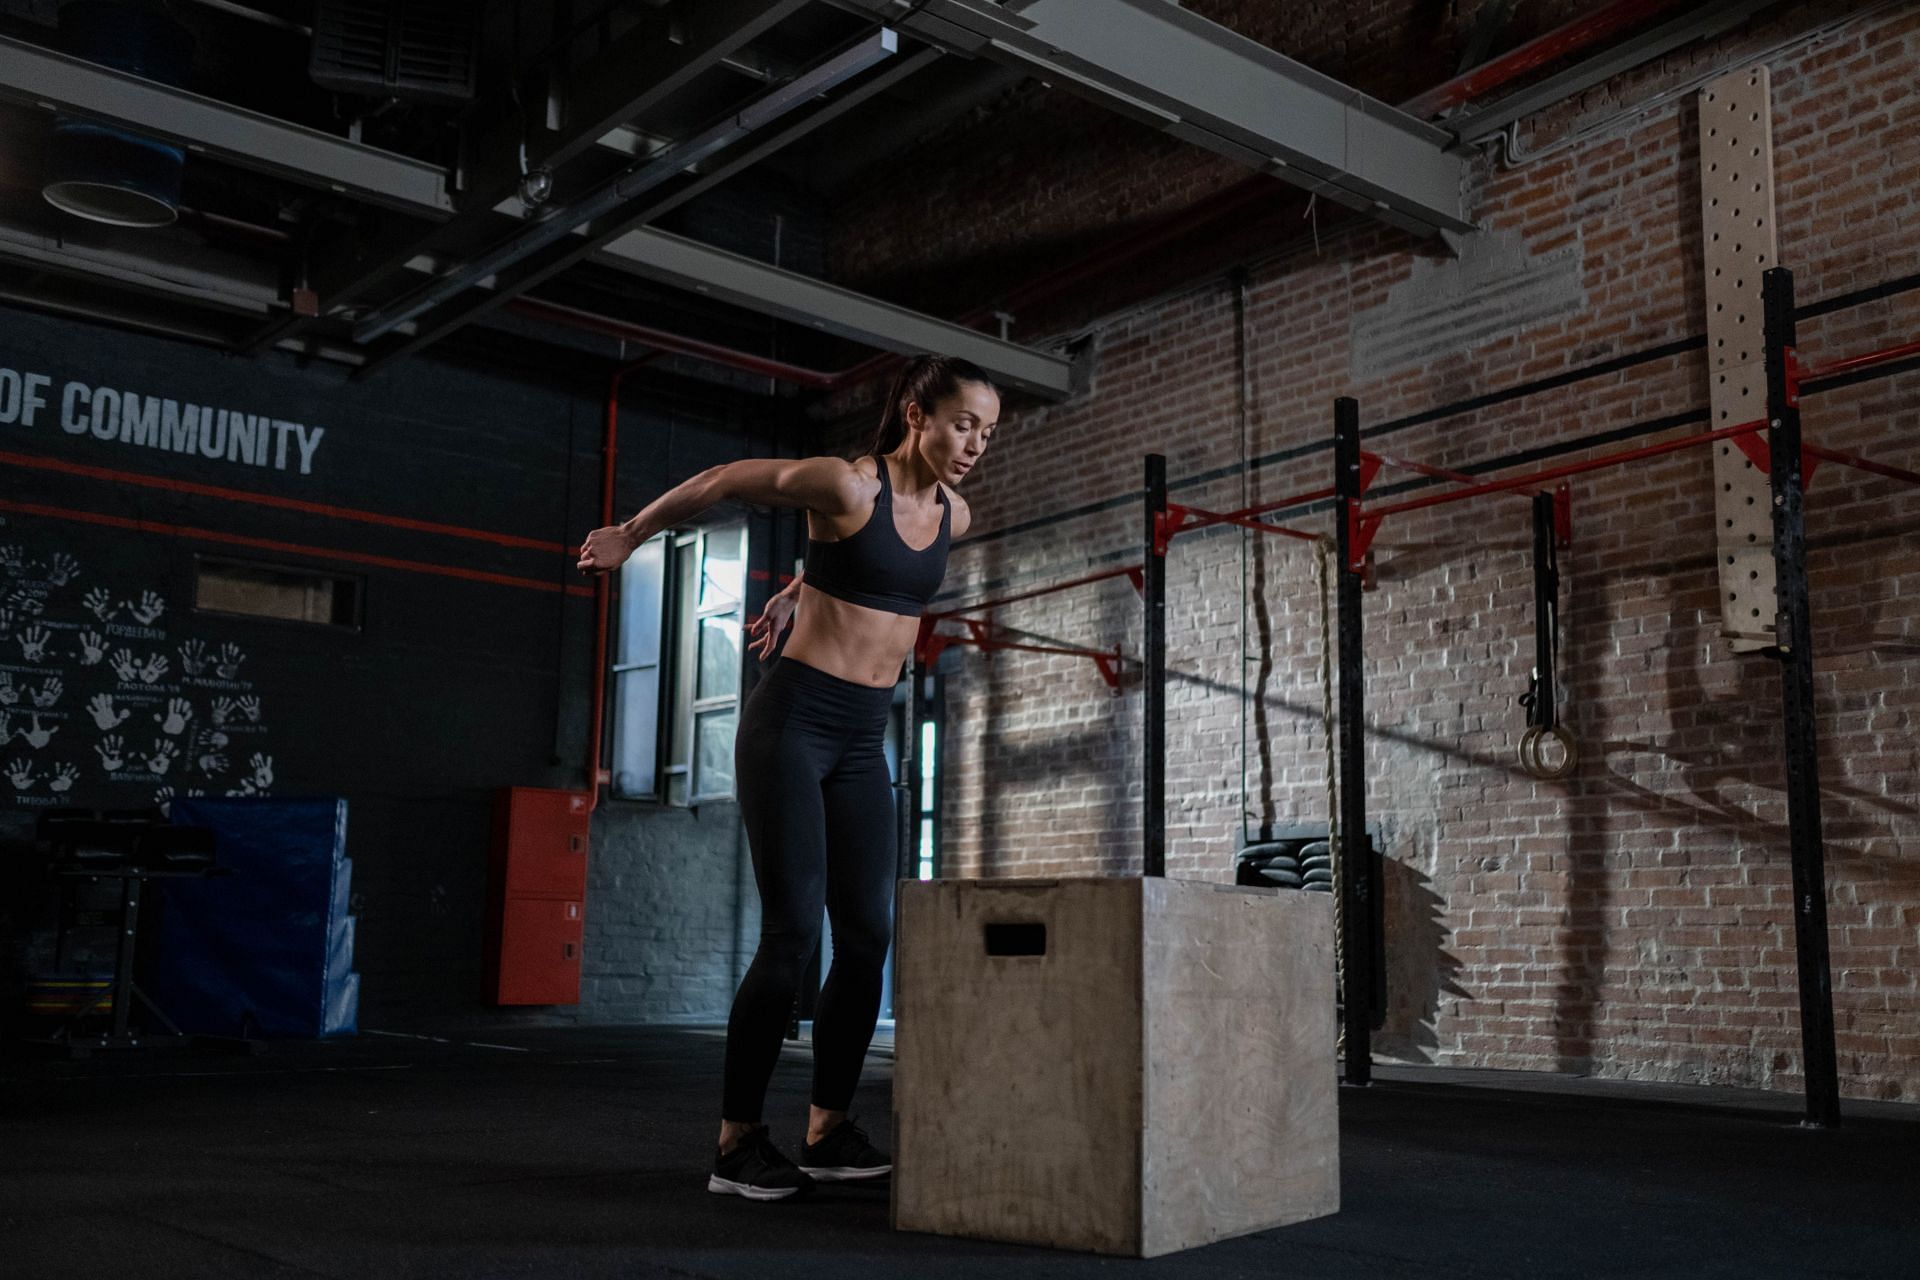 Skater Jumps: The Dynamic Exercise Your Workout is Missing